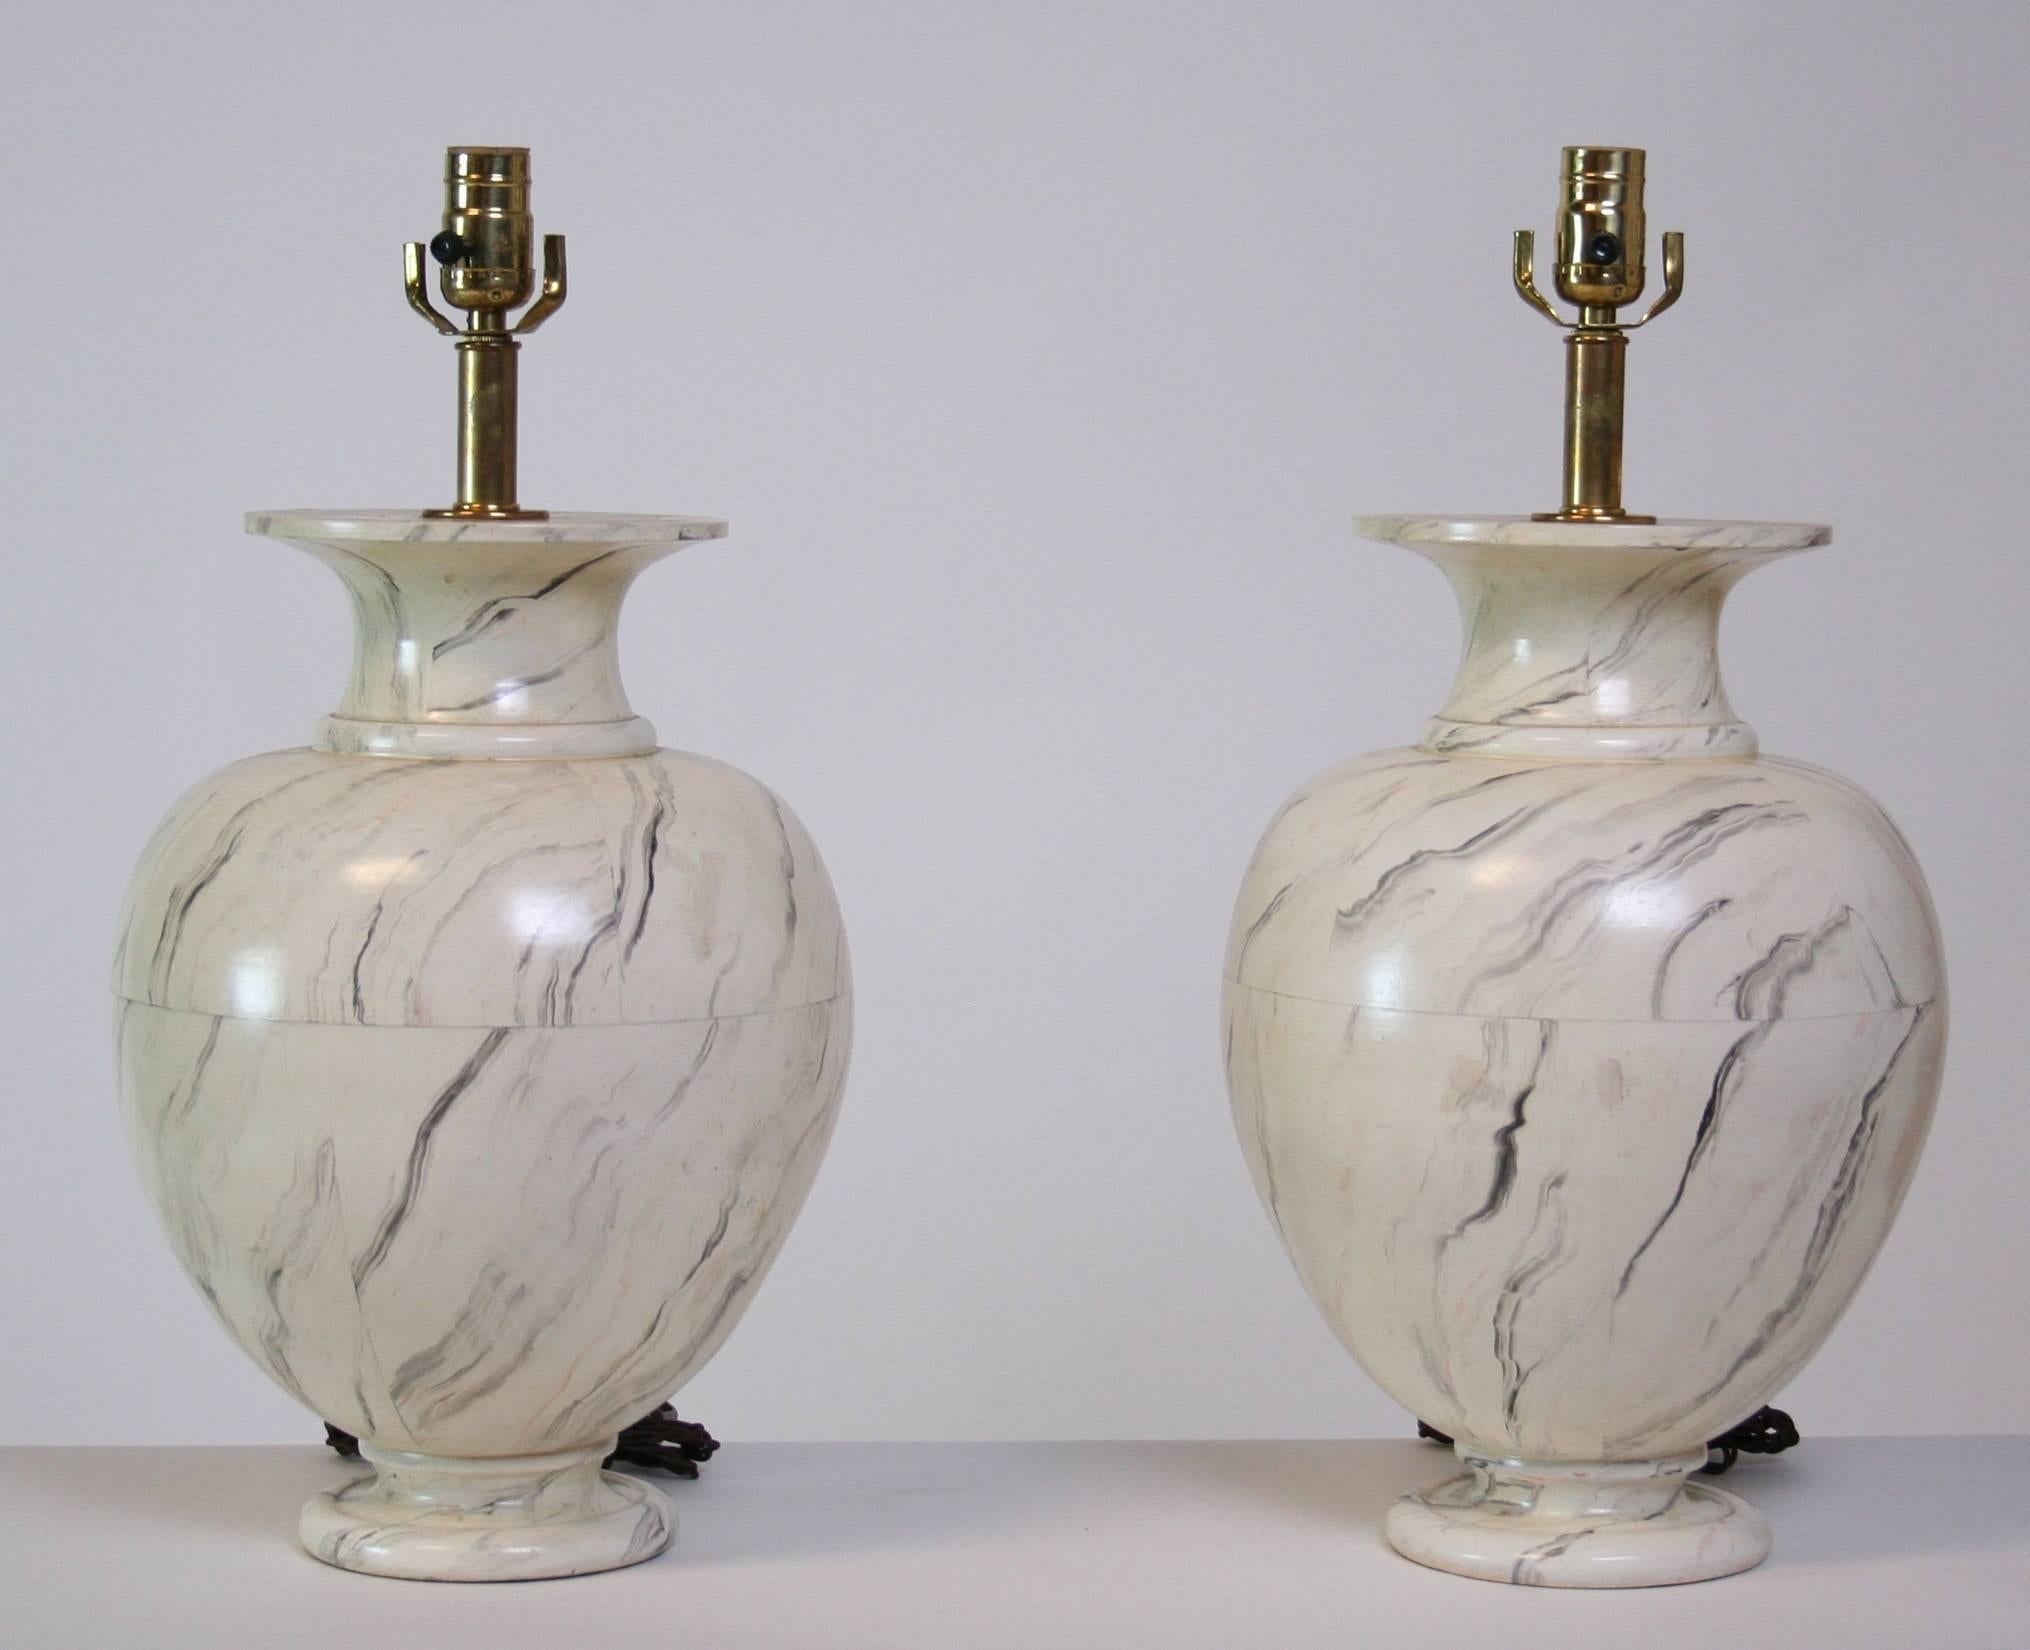 A lovely pair of Mid-Century Modern ceramic table lamps by Jean Roger in the shape of a classical urn with faux marble glaze, French, circa 1970. Shades for display only, height to top of socket 21